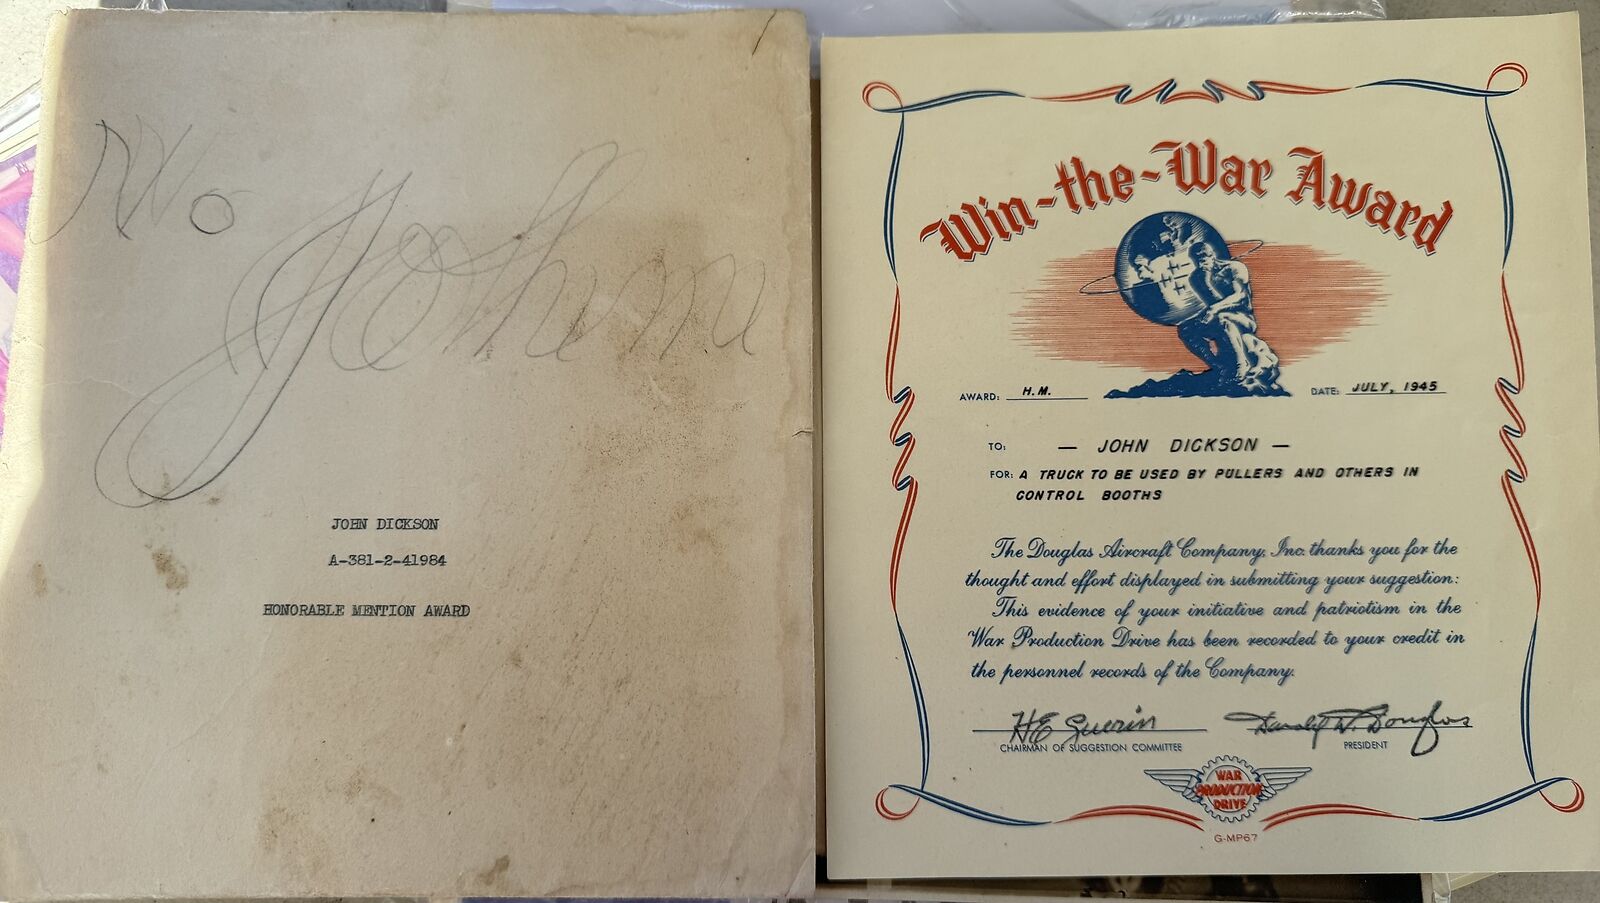 Vintage 1945 John Dickson Honorable Mention Win-the-War Award Certificate Signed